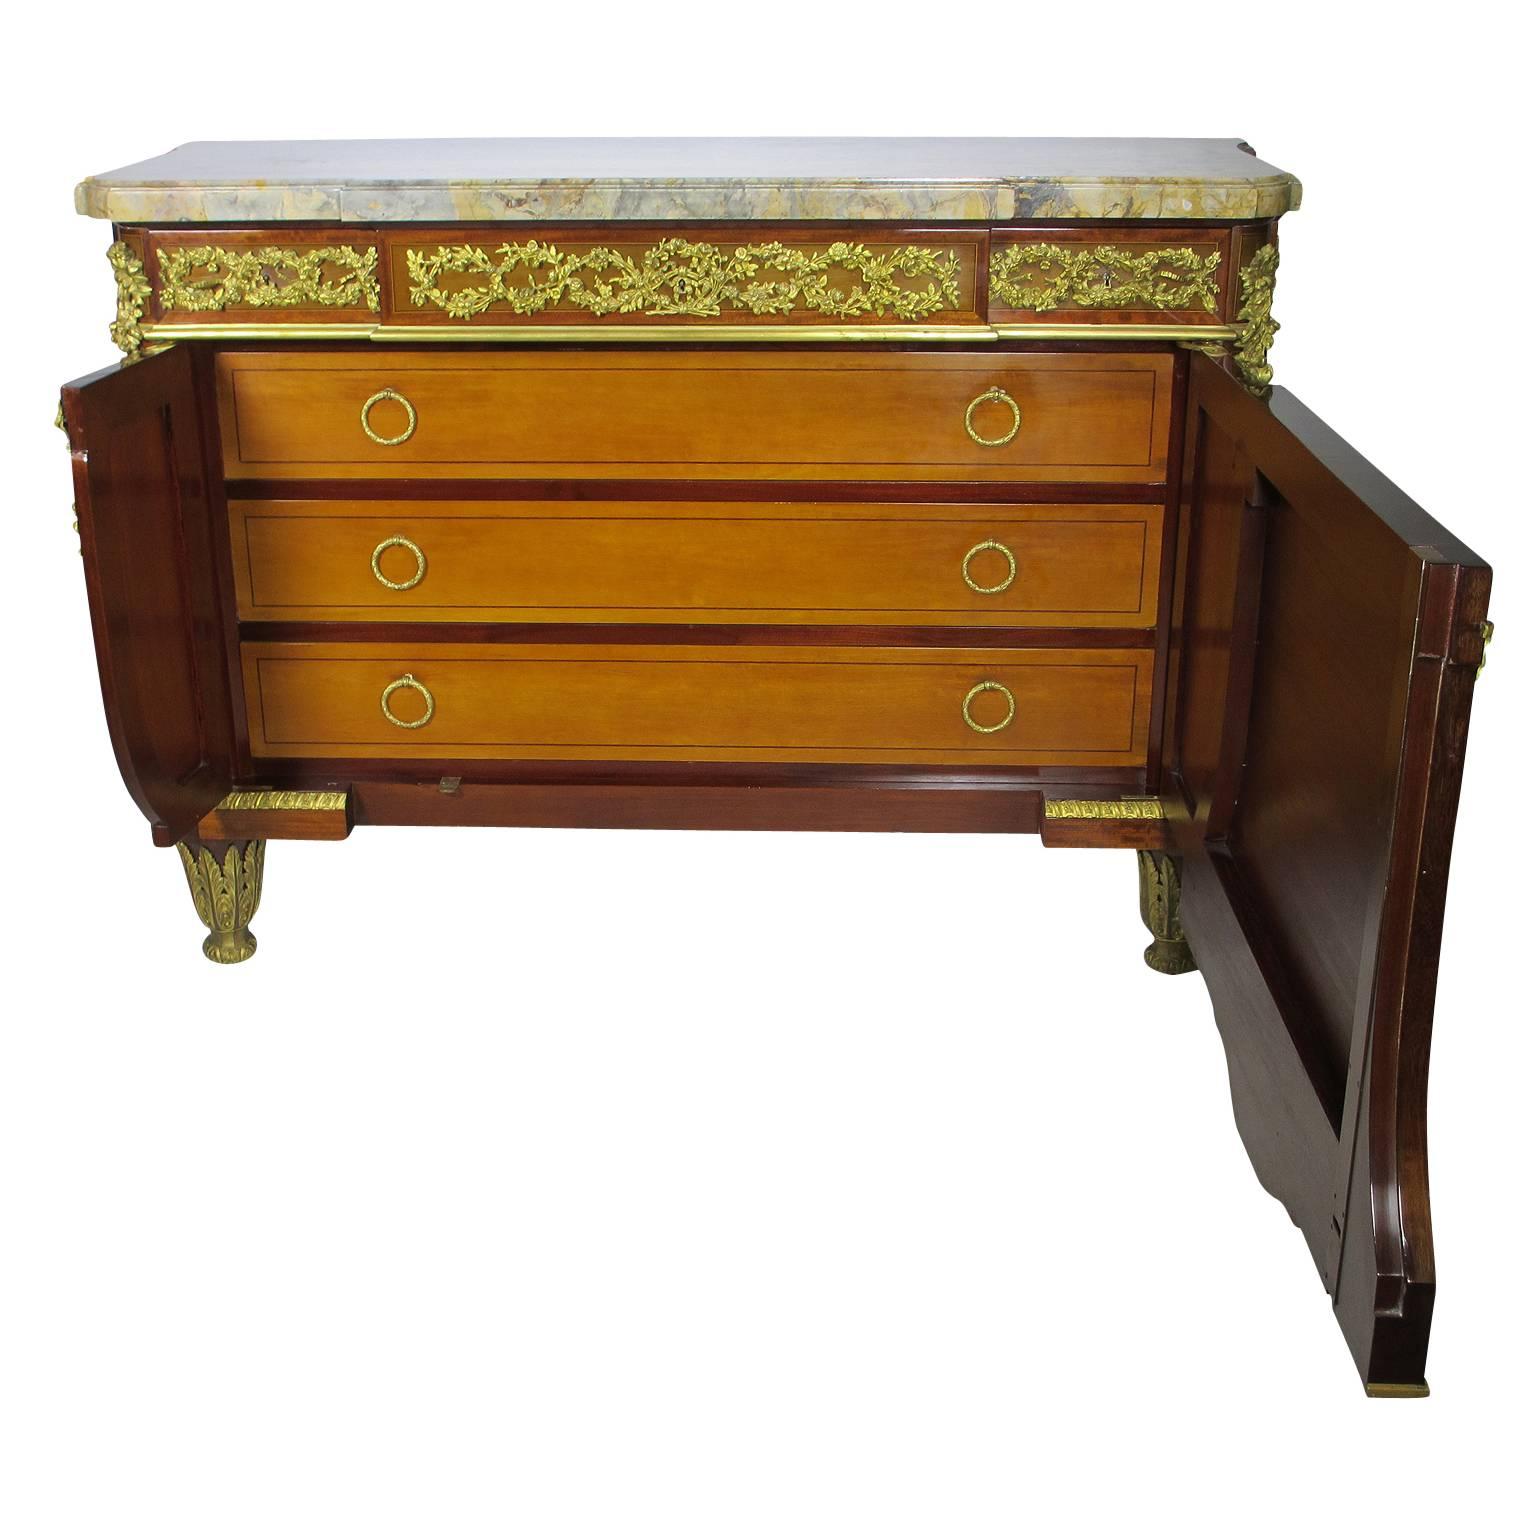 A very fine and palatial French 19th century Louis XVI style gilt bronze-mounted mahogany, satinwood, tulipwood and fruitwood marquetry and parquetry commode, after a model by Jean Henri Riesener (French, 1734-1806) fitted with three frieze drawers